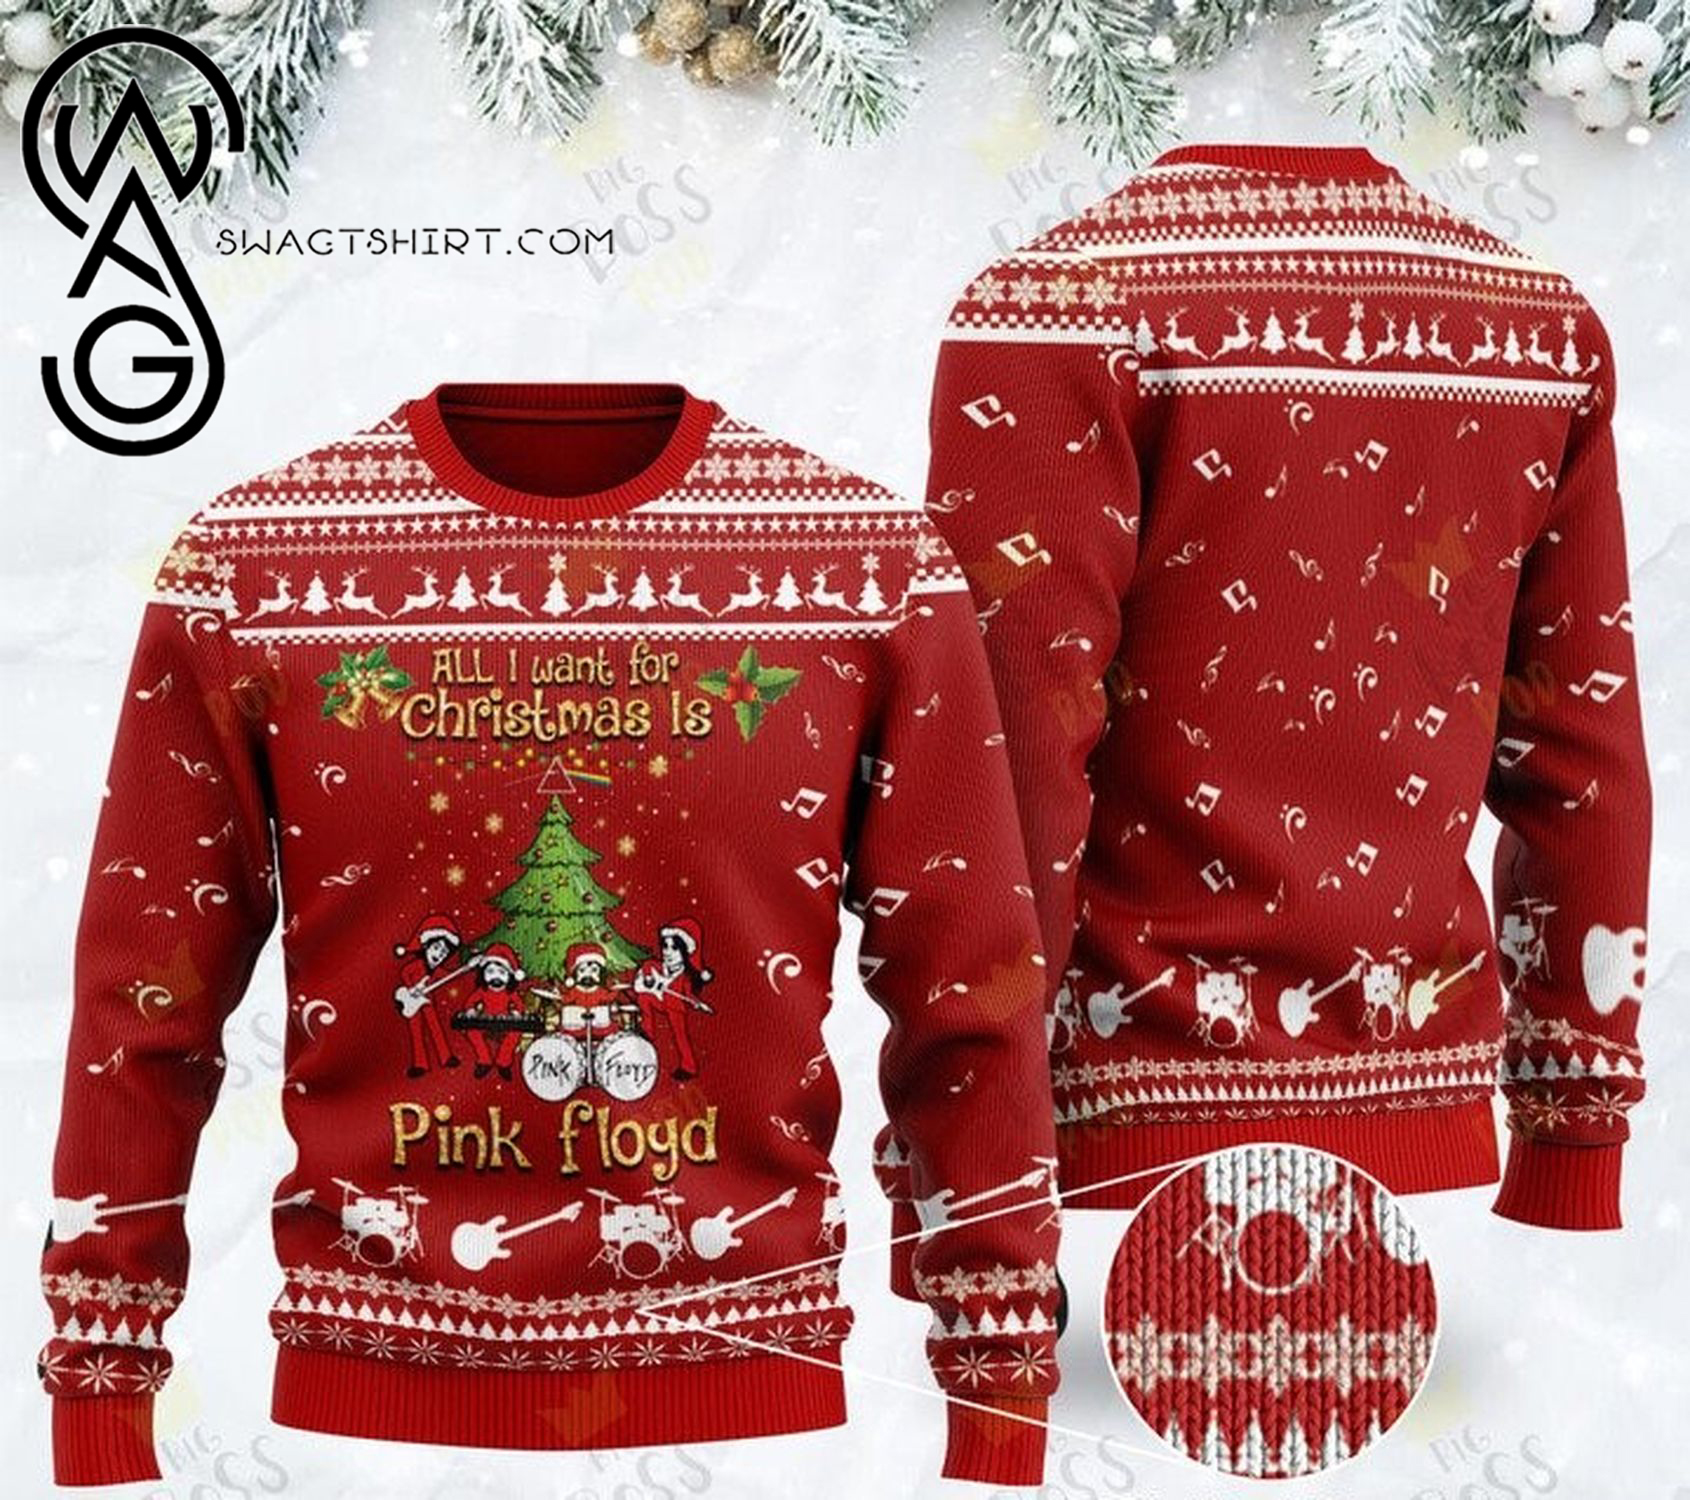 All i want for christmas is pink floyd ugly christmas sweater